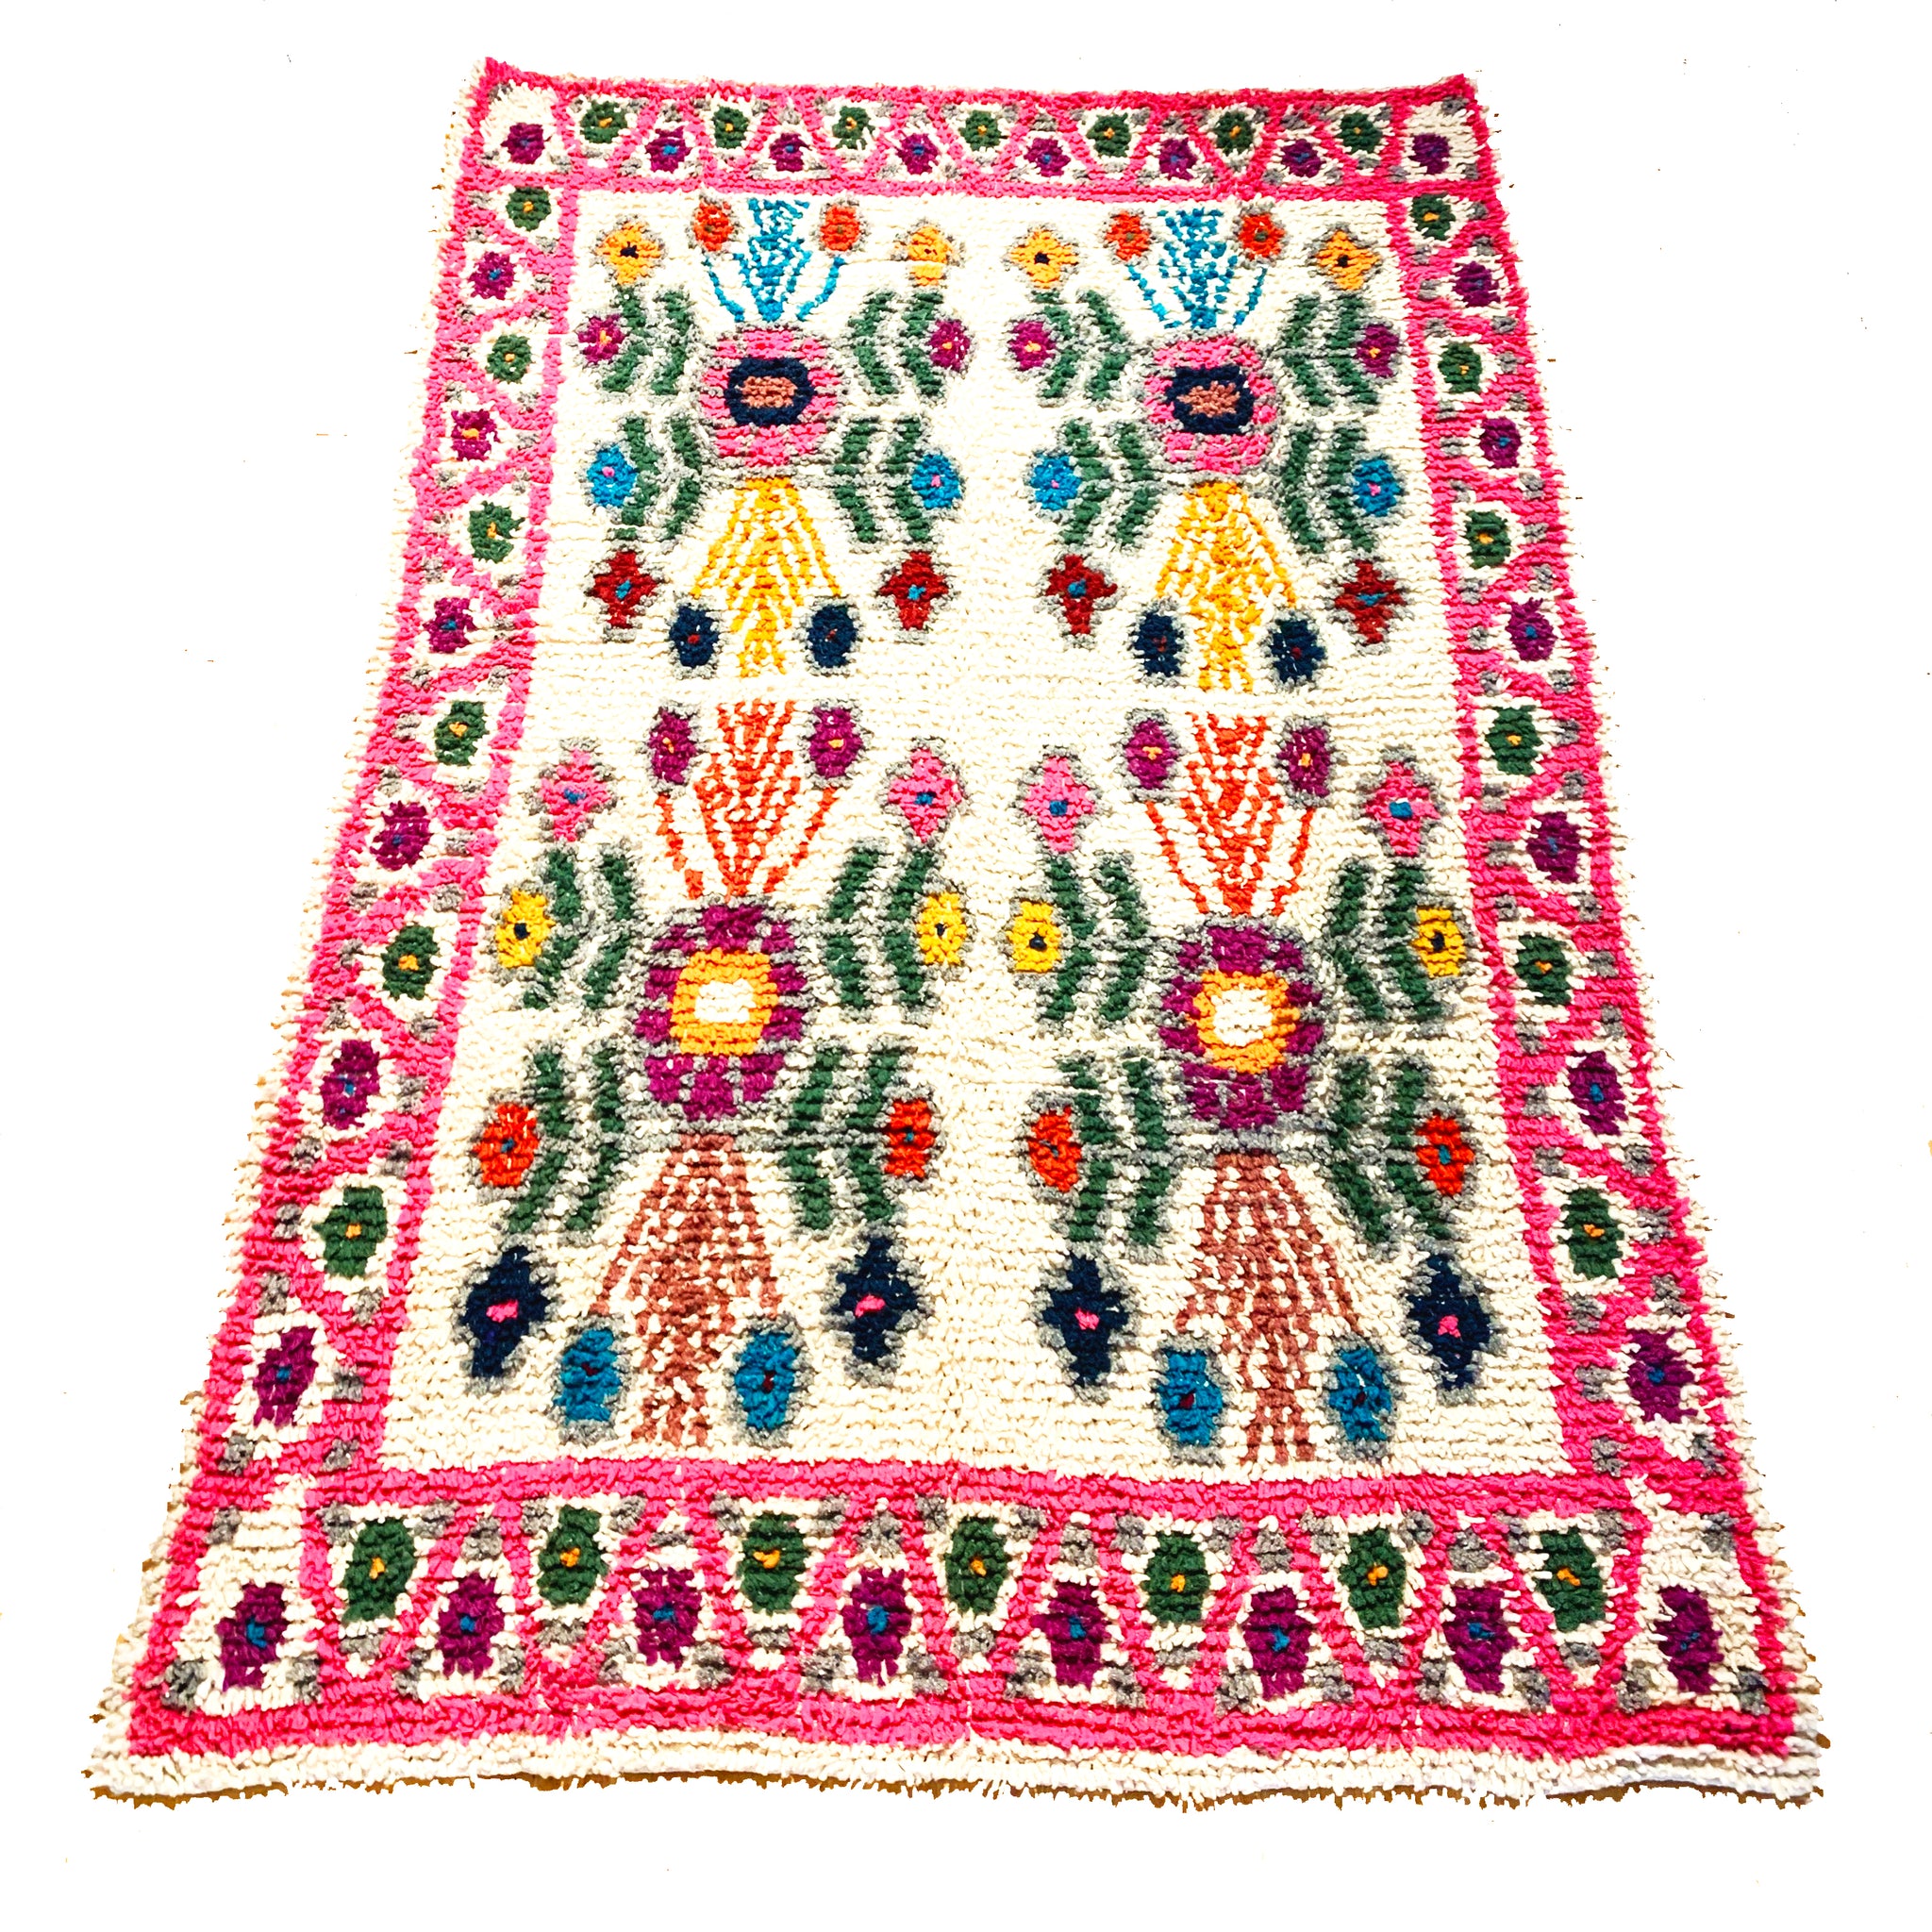 Pink Handwoven High Pile Wool Rug from Guatemala - 5 x 7 Feet